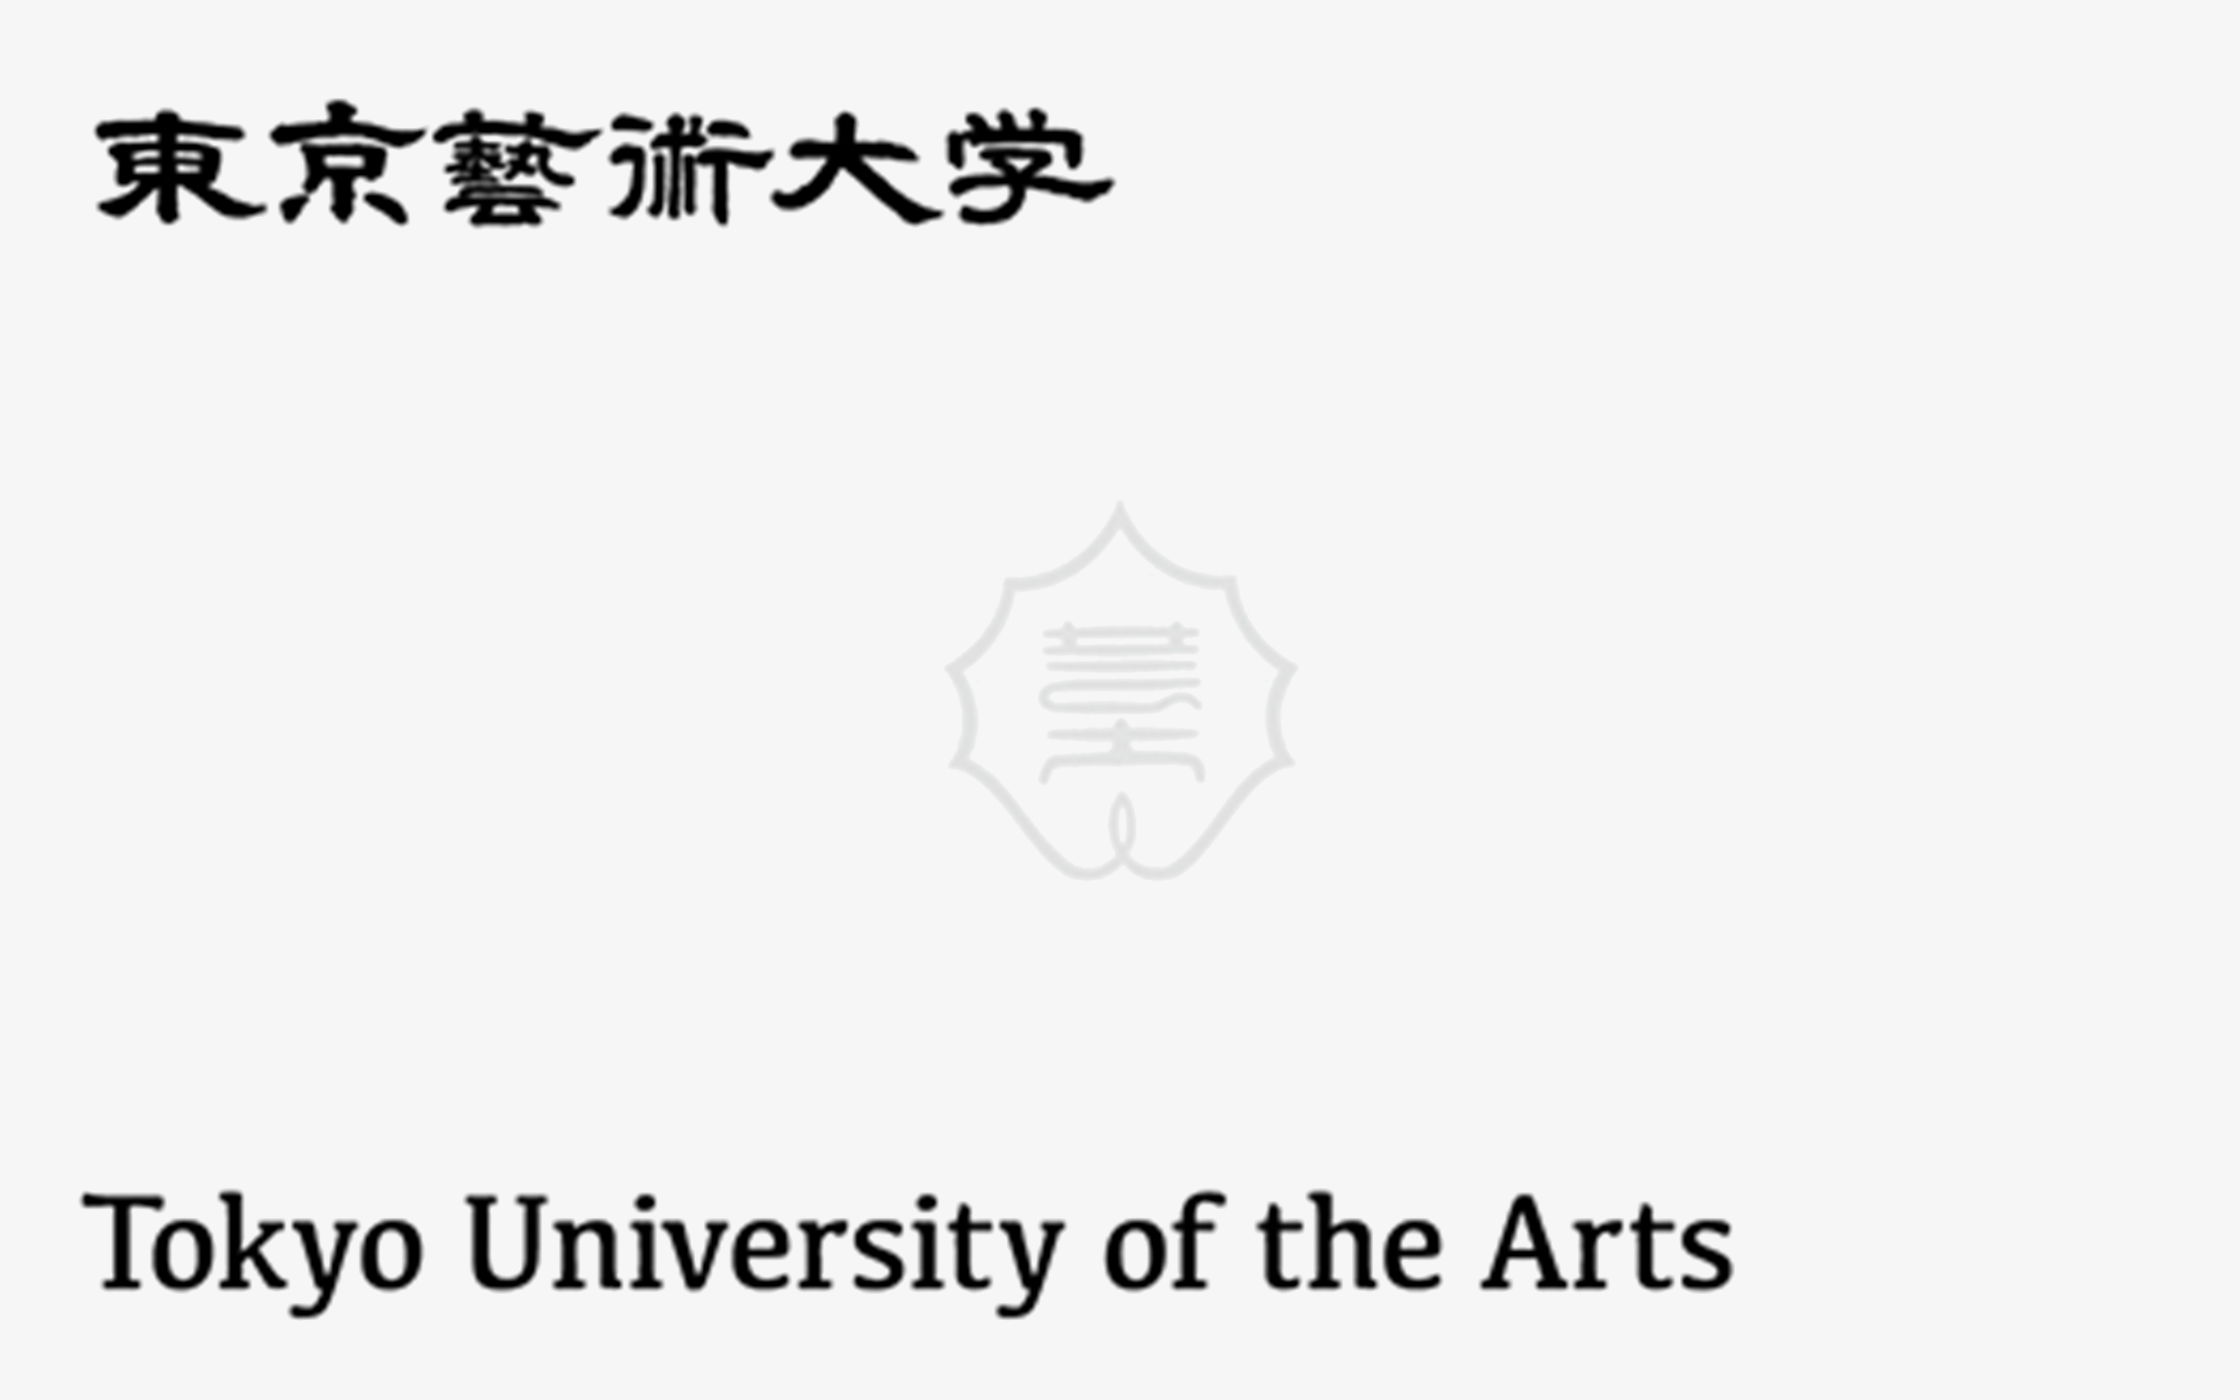 Graphic Tools for Tokyo University of the Arts